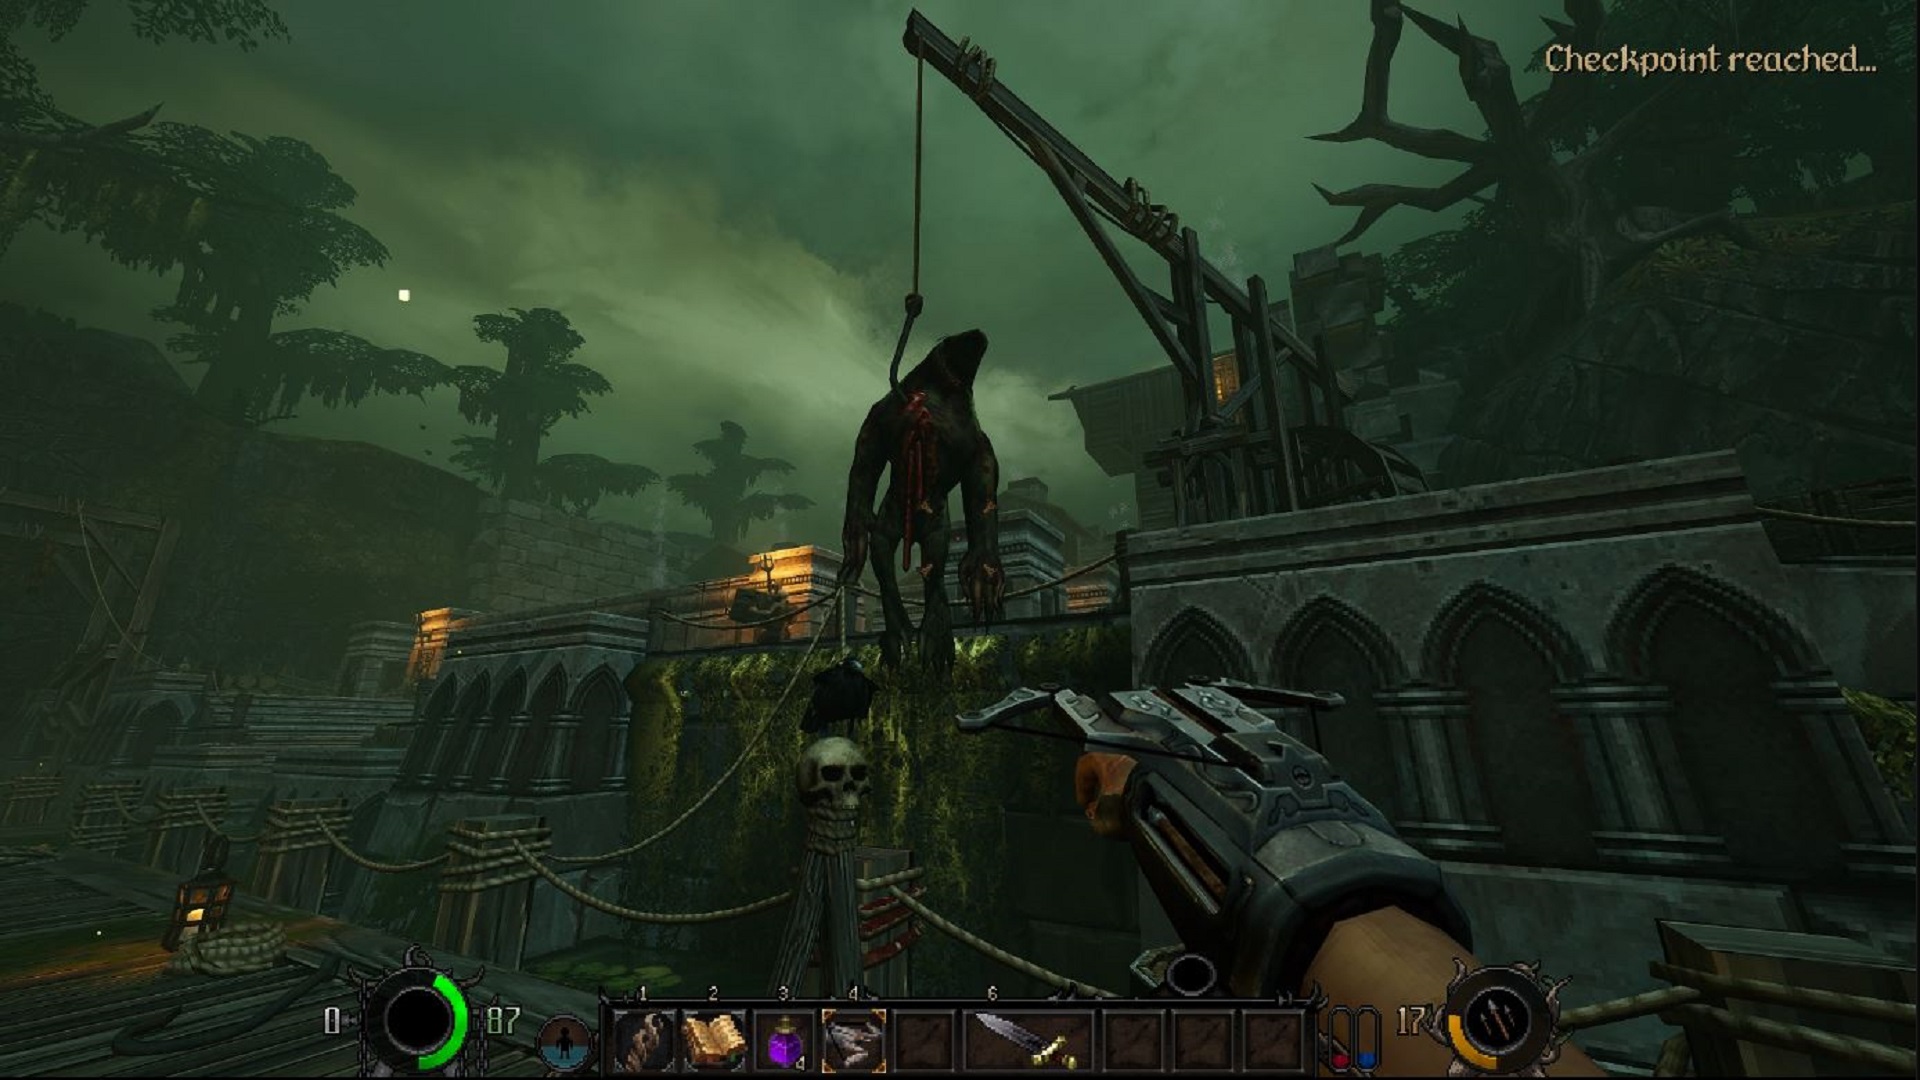 The player character looks across a dock. There is a monster hanging from a fishing hook and a skull mounted on a wooden stake. In the background, an NPC carries a box of goods.